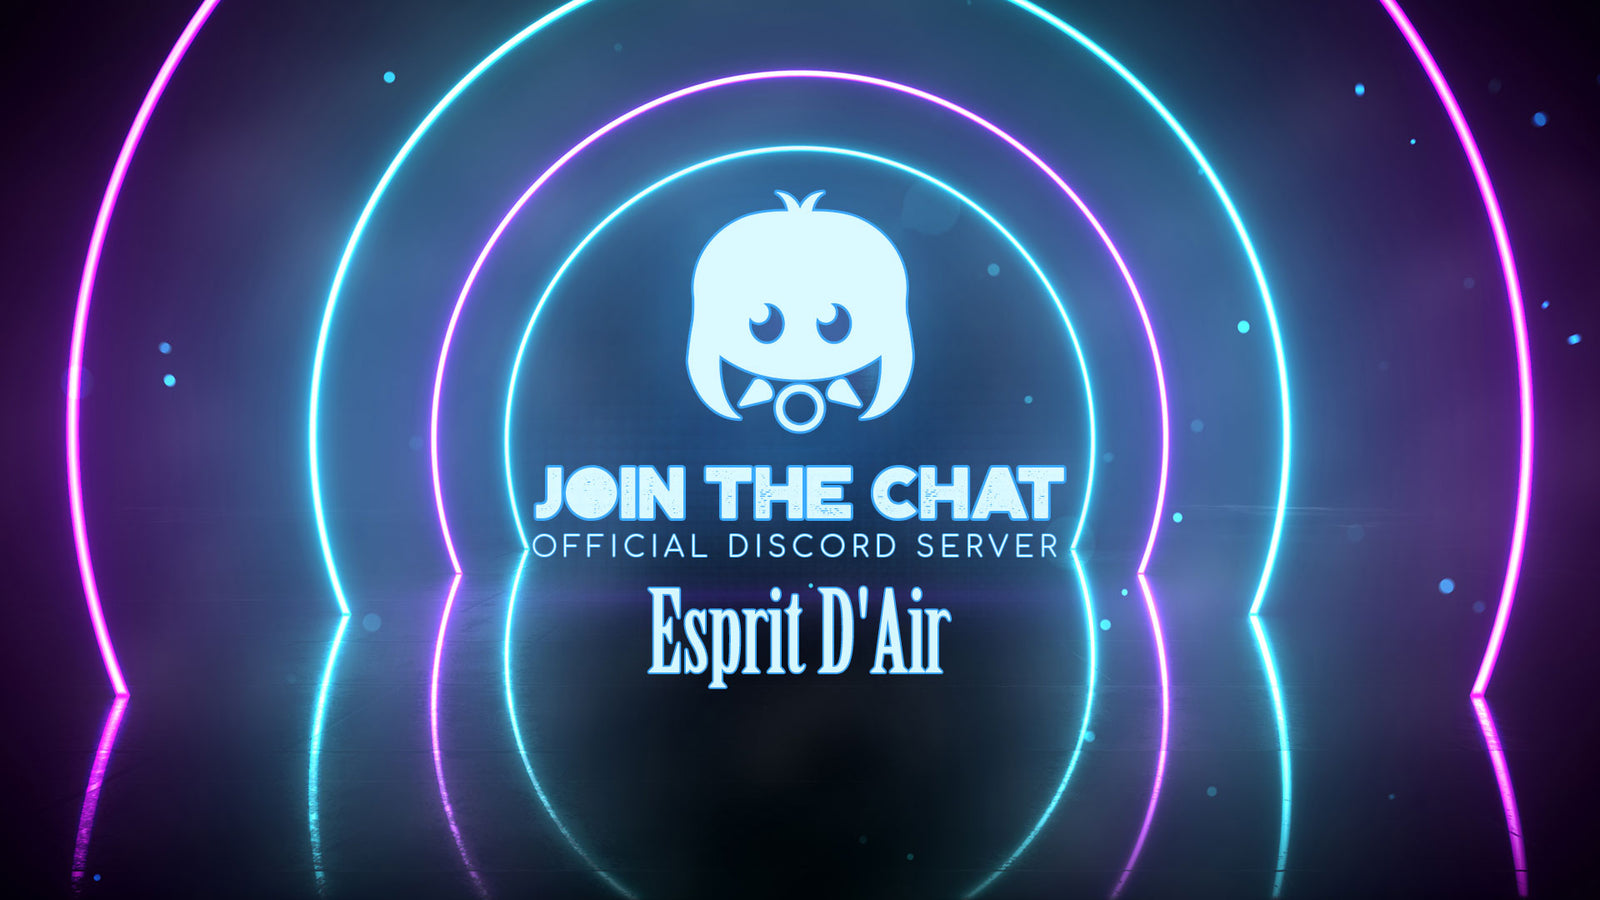 Esprit D'Air is now on Discord!